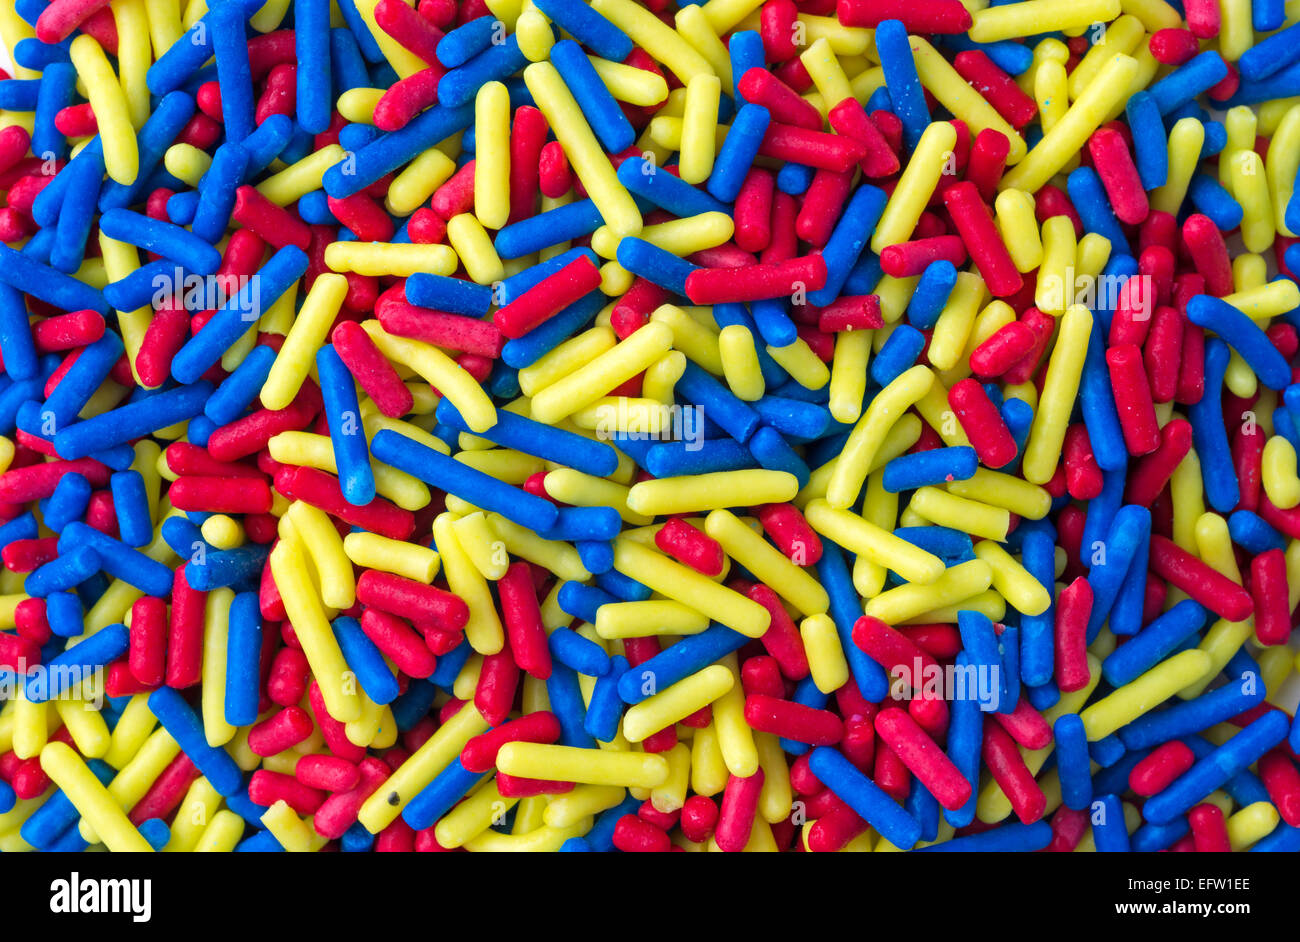 A very close view of colorful candy sprinkles. Stock Photo